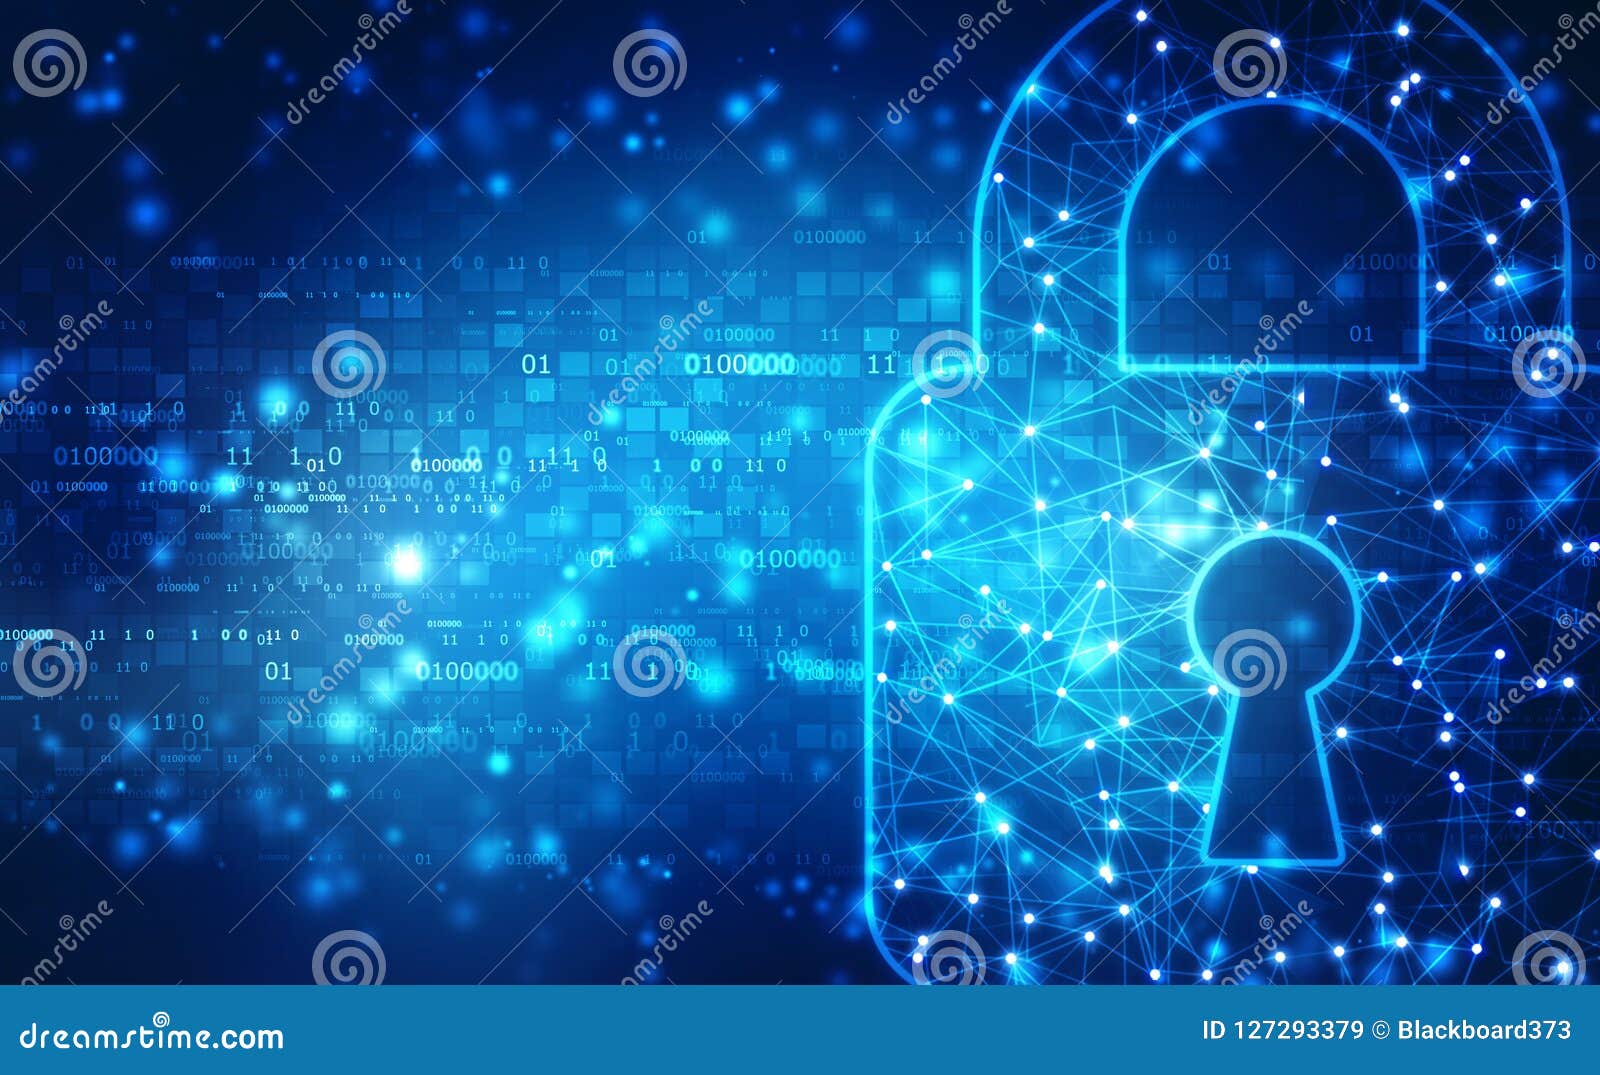 closed padlock on digital background, cyber security and internet security